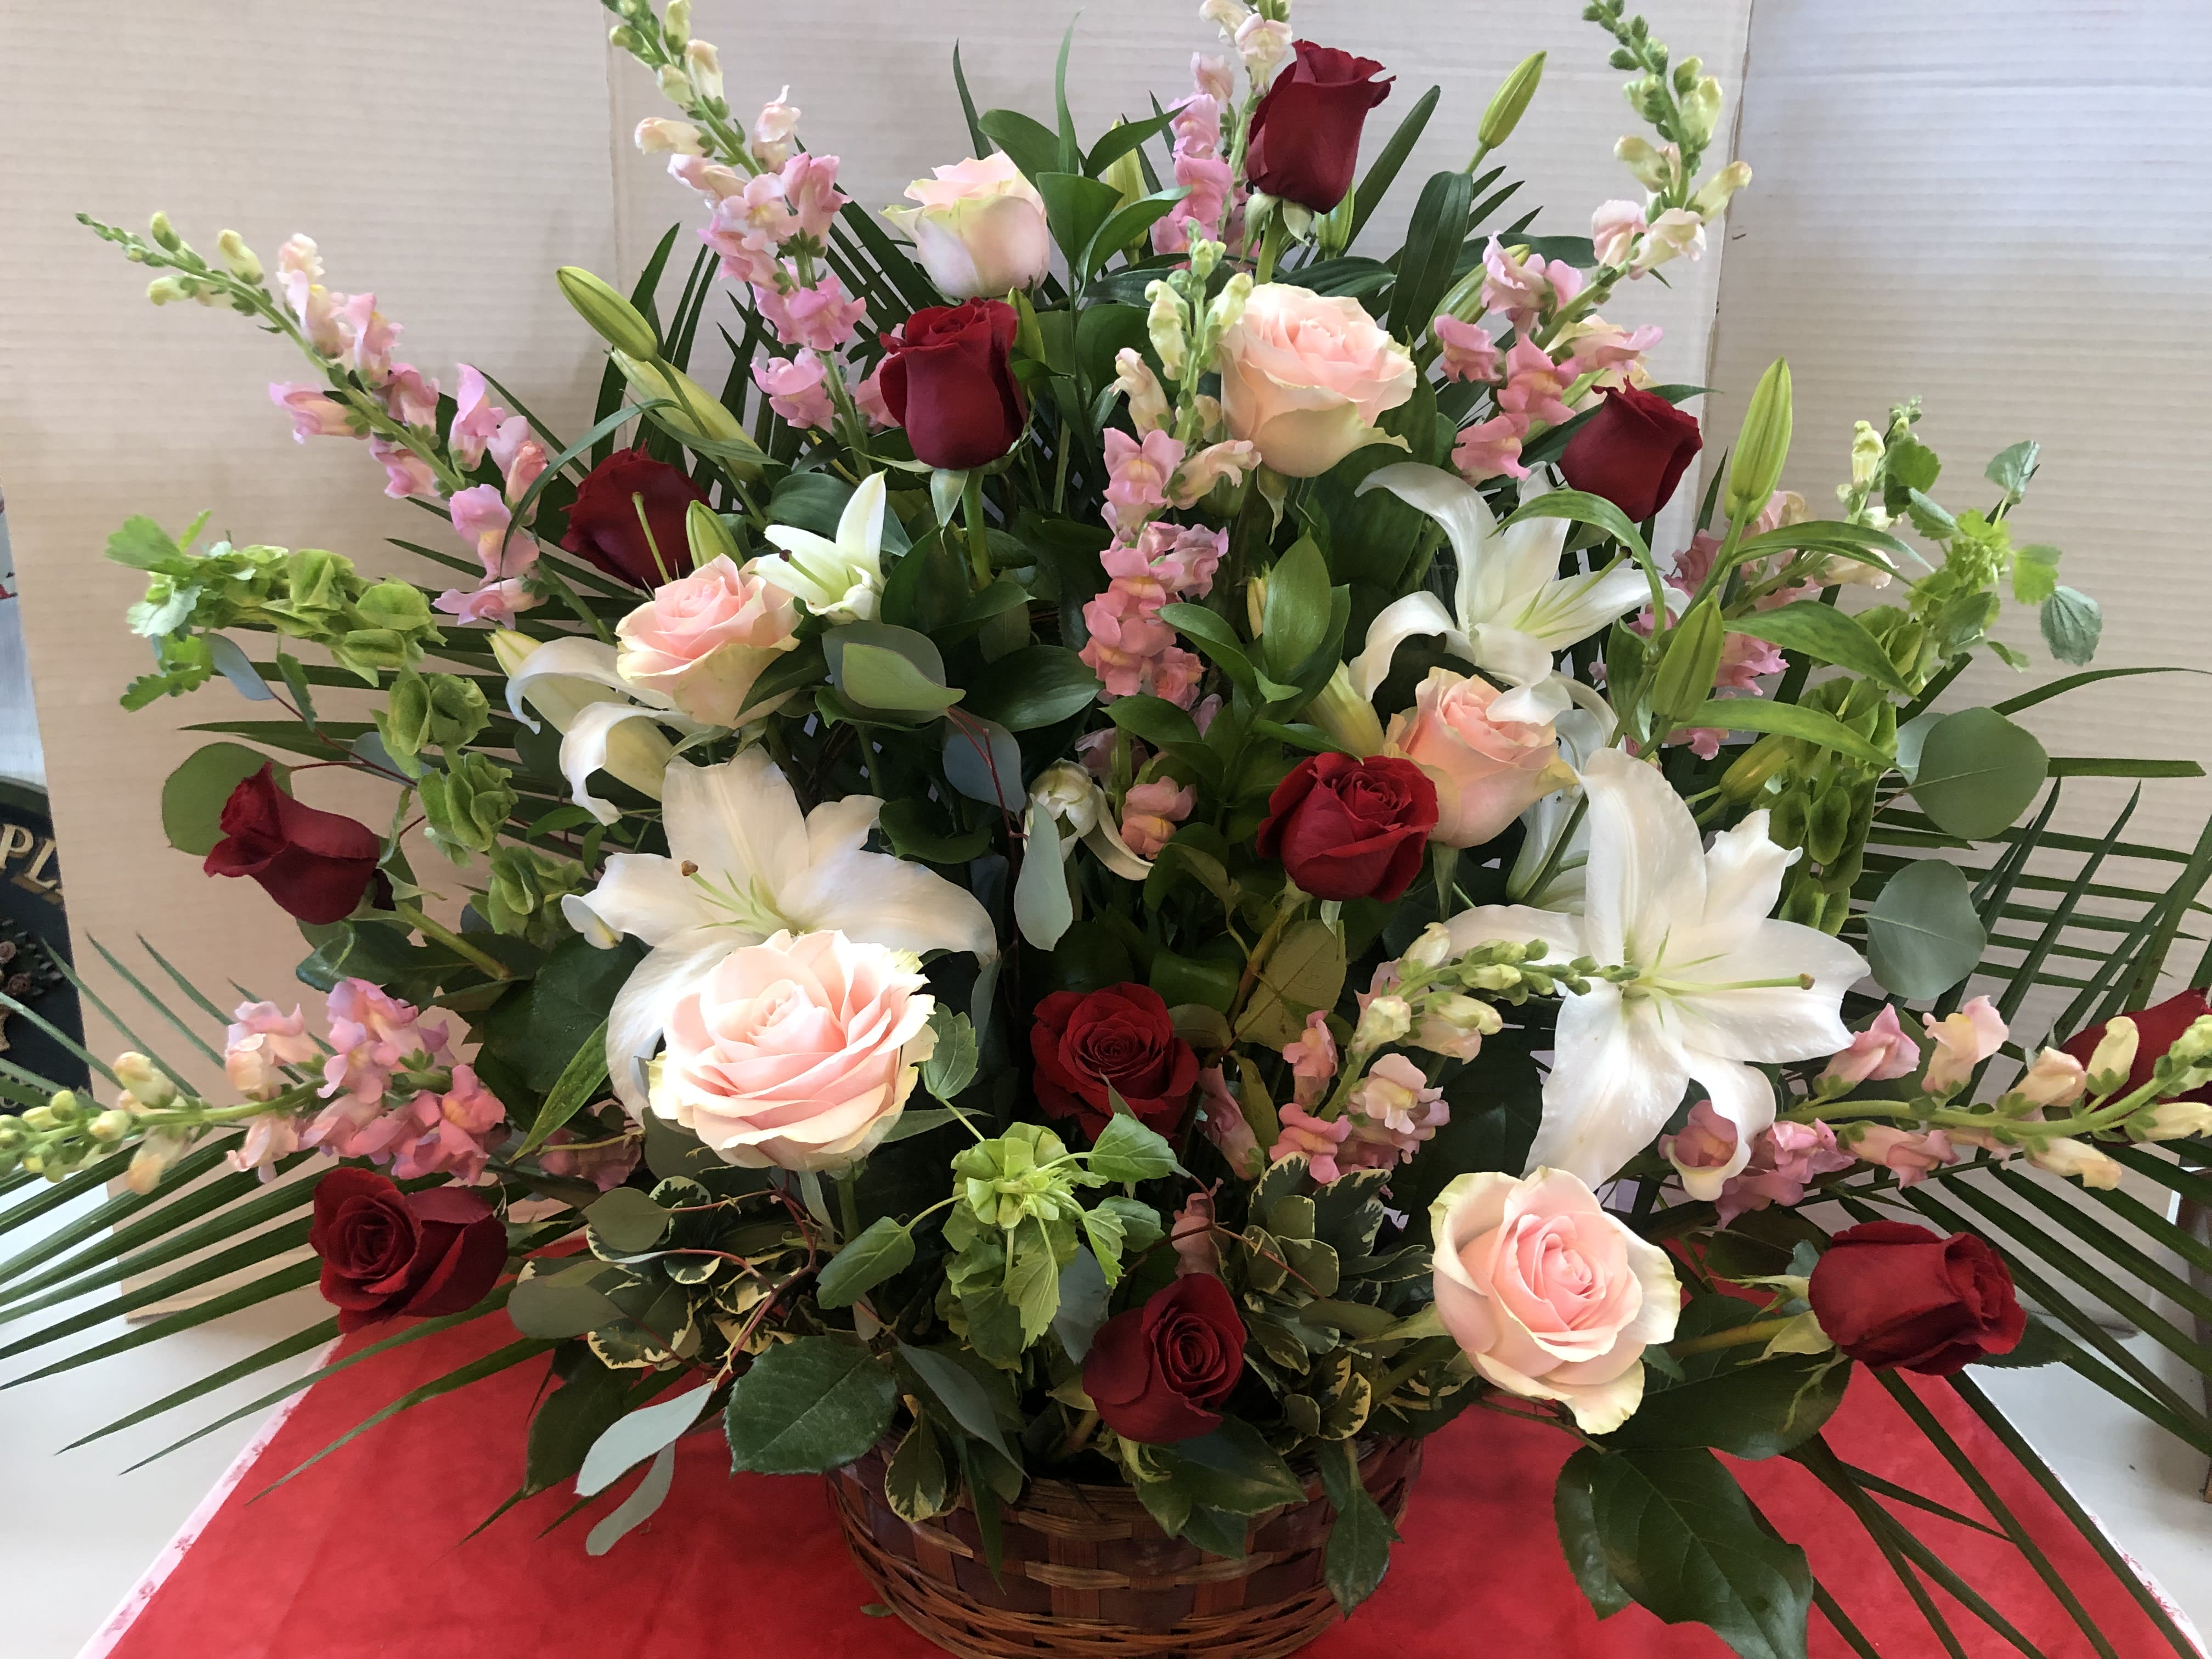 Eternal Basket - Pink Roses , Pink Snapdragons, White Lilies, Lisianthus , Eucalytus, Assorted Fancy Greens